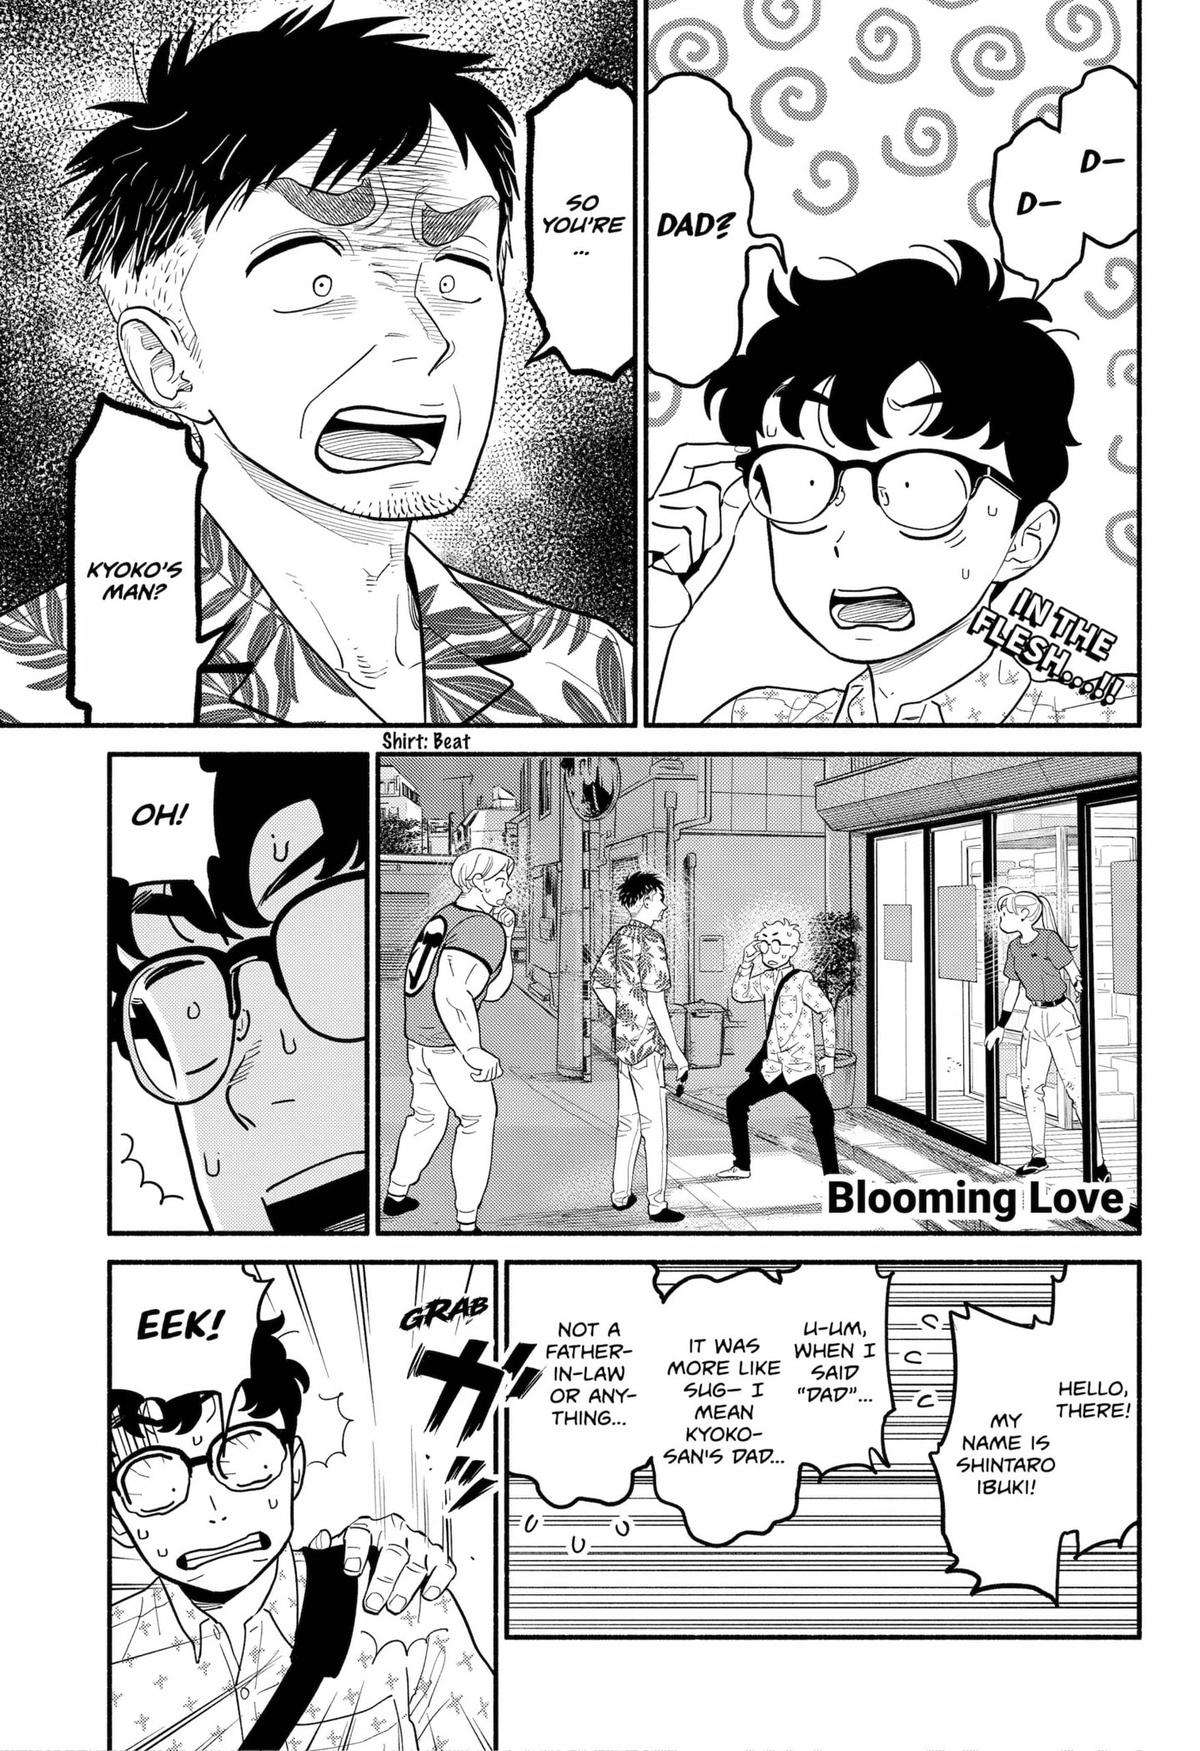 Blooming Love - chapter 29 - #1